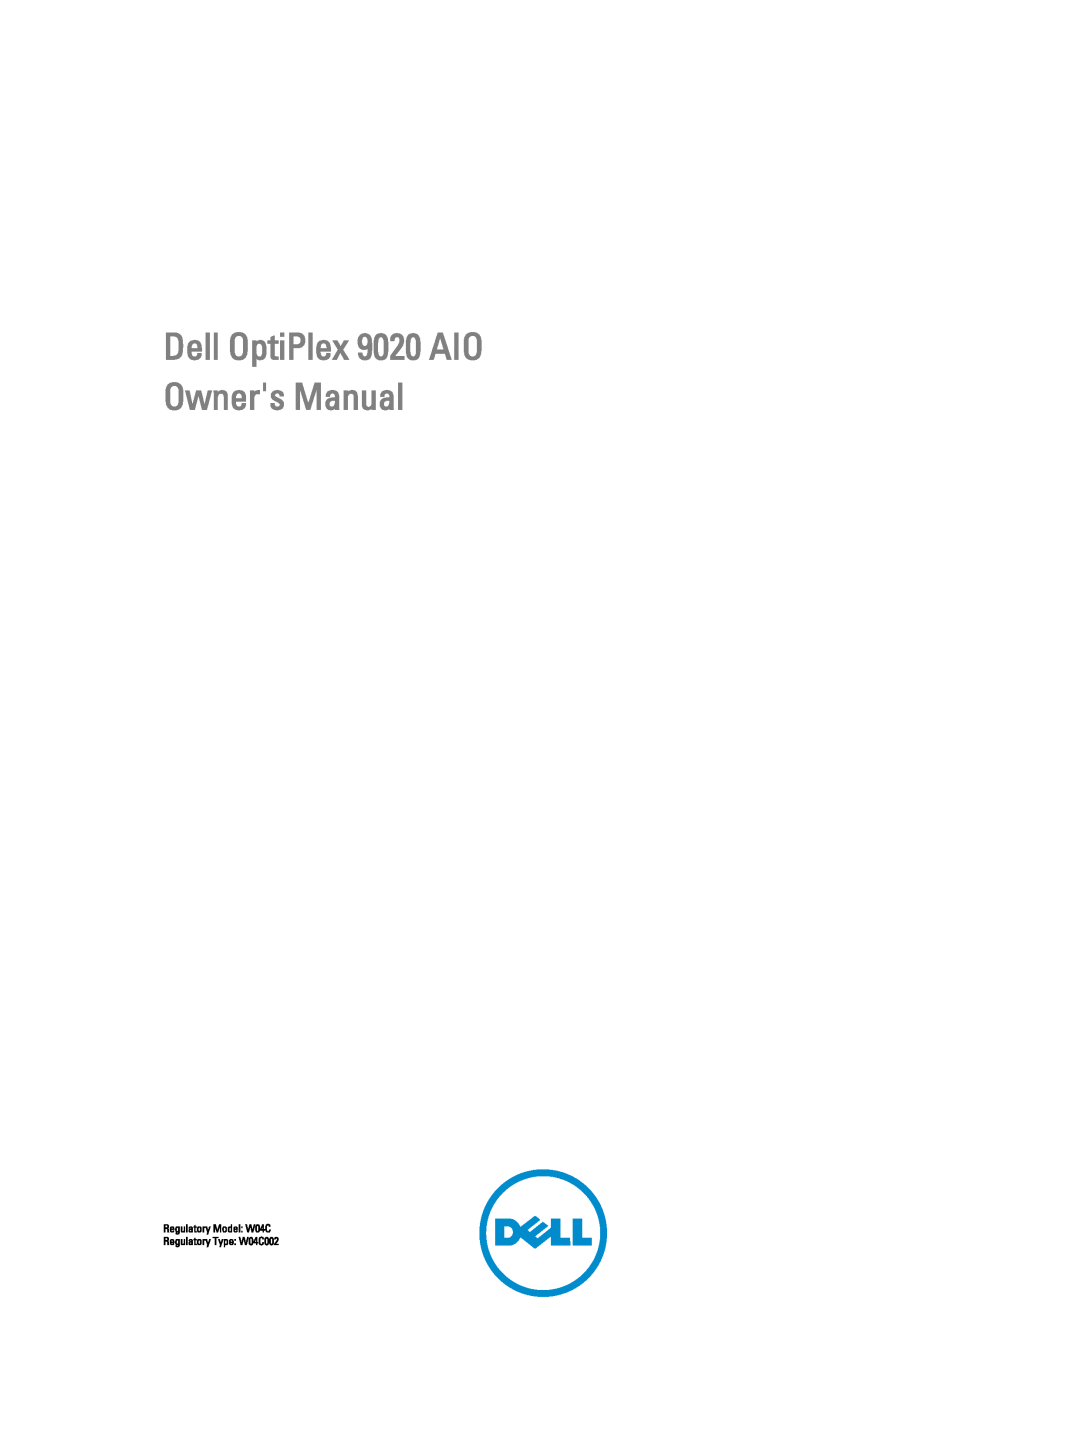 Dell owner manual Dell OptiPlex 9010 All-In-One Touch Owners Manual, Regulatory Model W04C Regulatory Type W04C001 